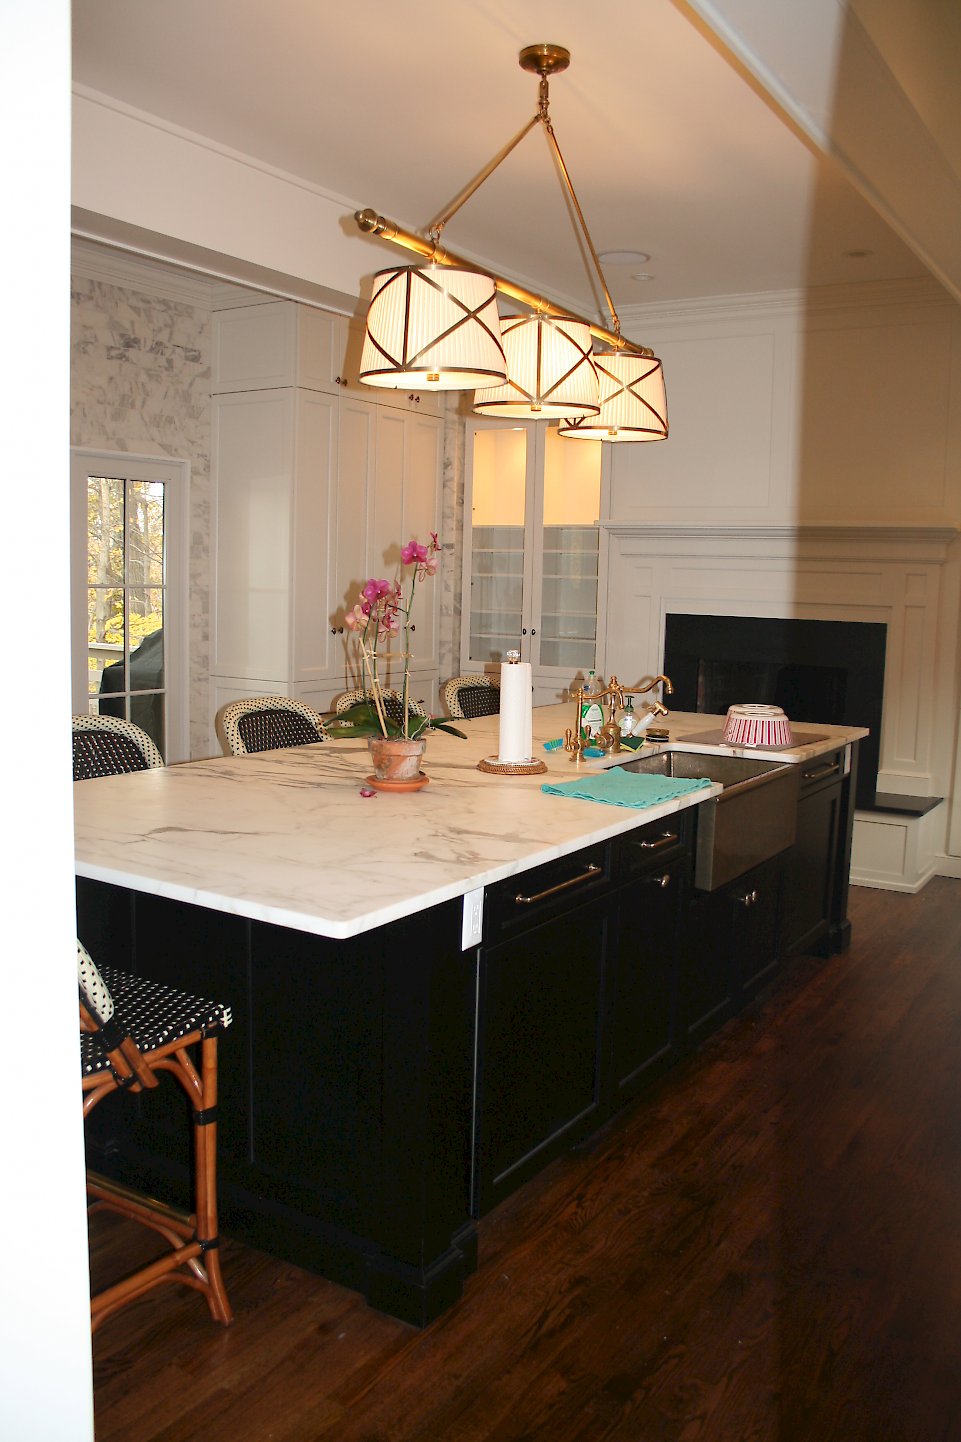 Inside view of the kitchen island.